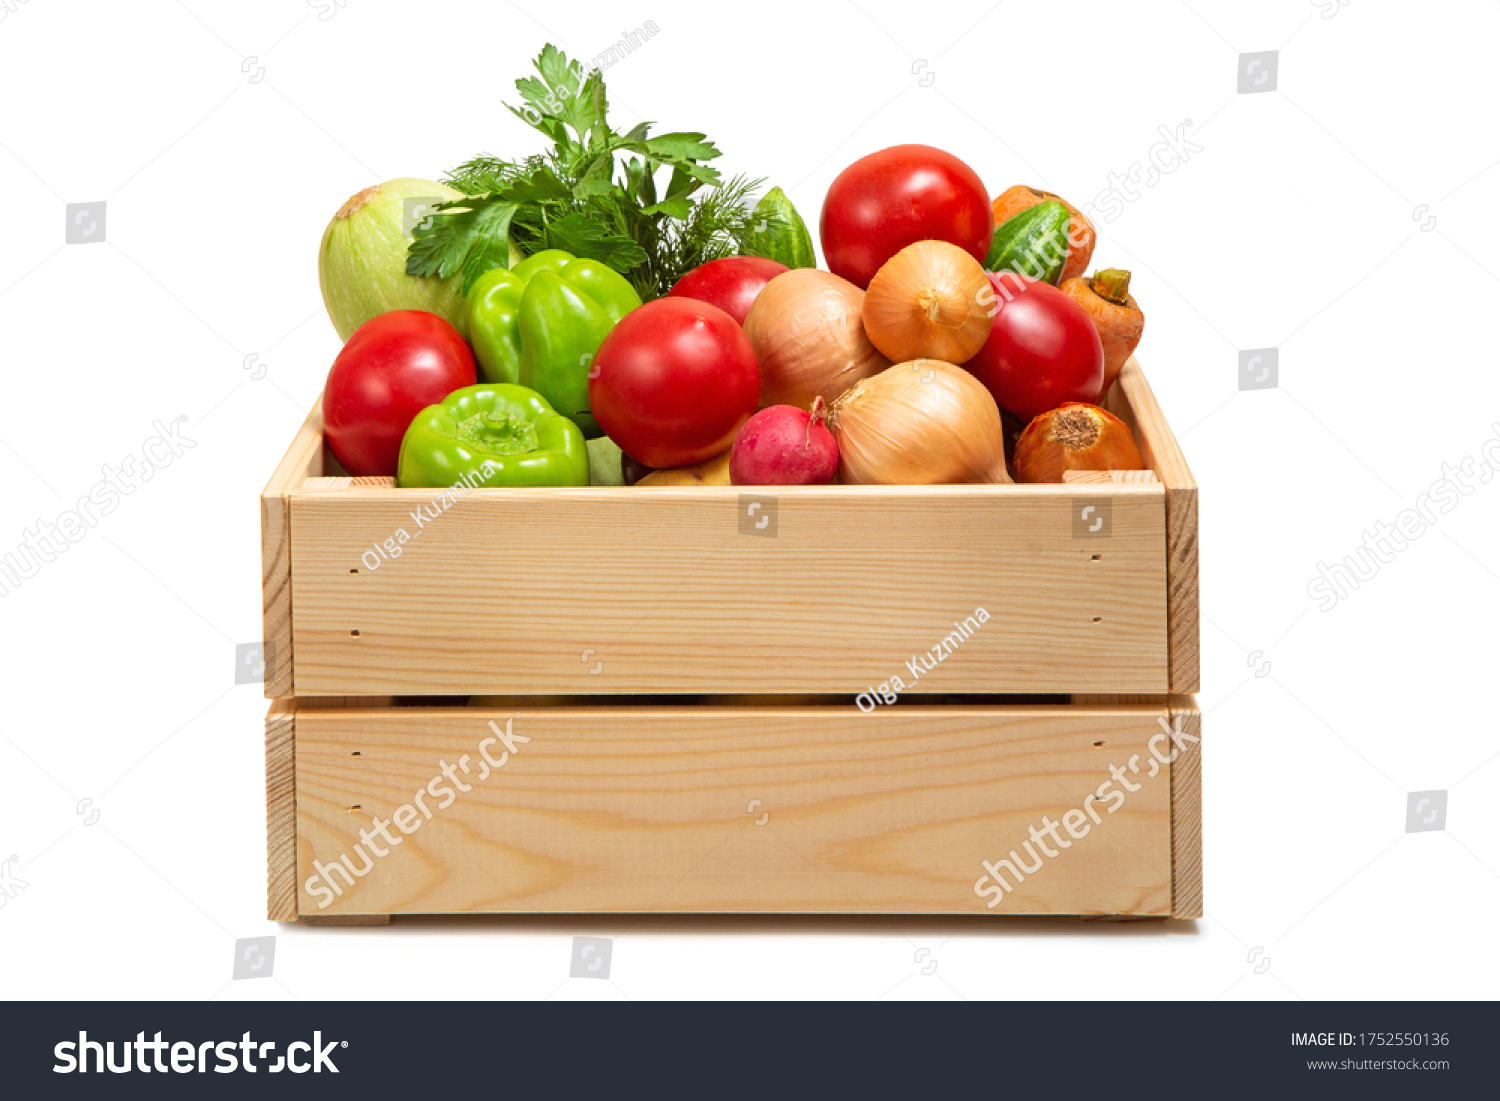 Wooden box with vegetables on a white background. Zucchini, carrots, tomatoes, cucumbers and greens. Fresh vegetables. Agricultural Products. Delivery of products. #1752550136